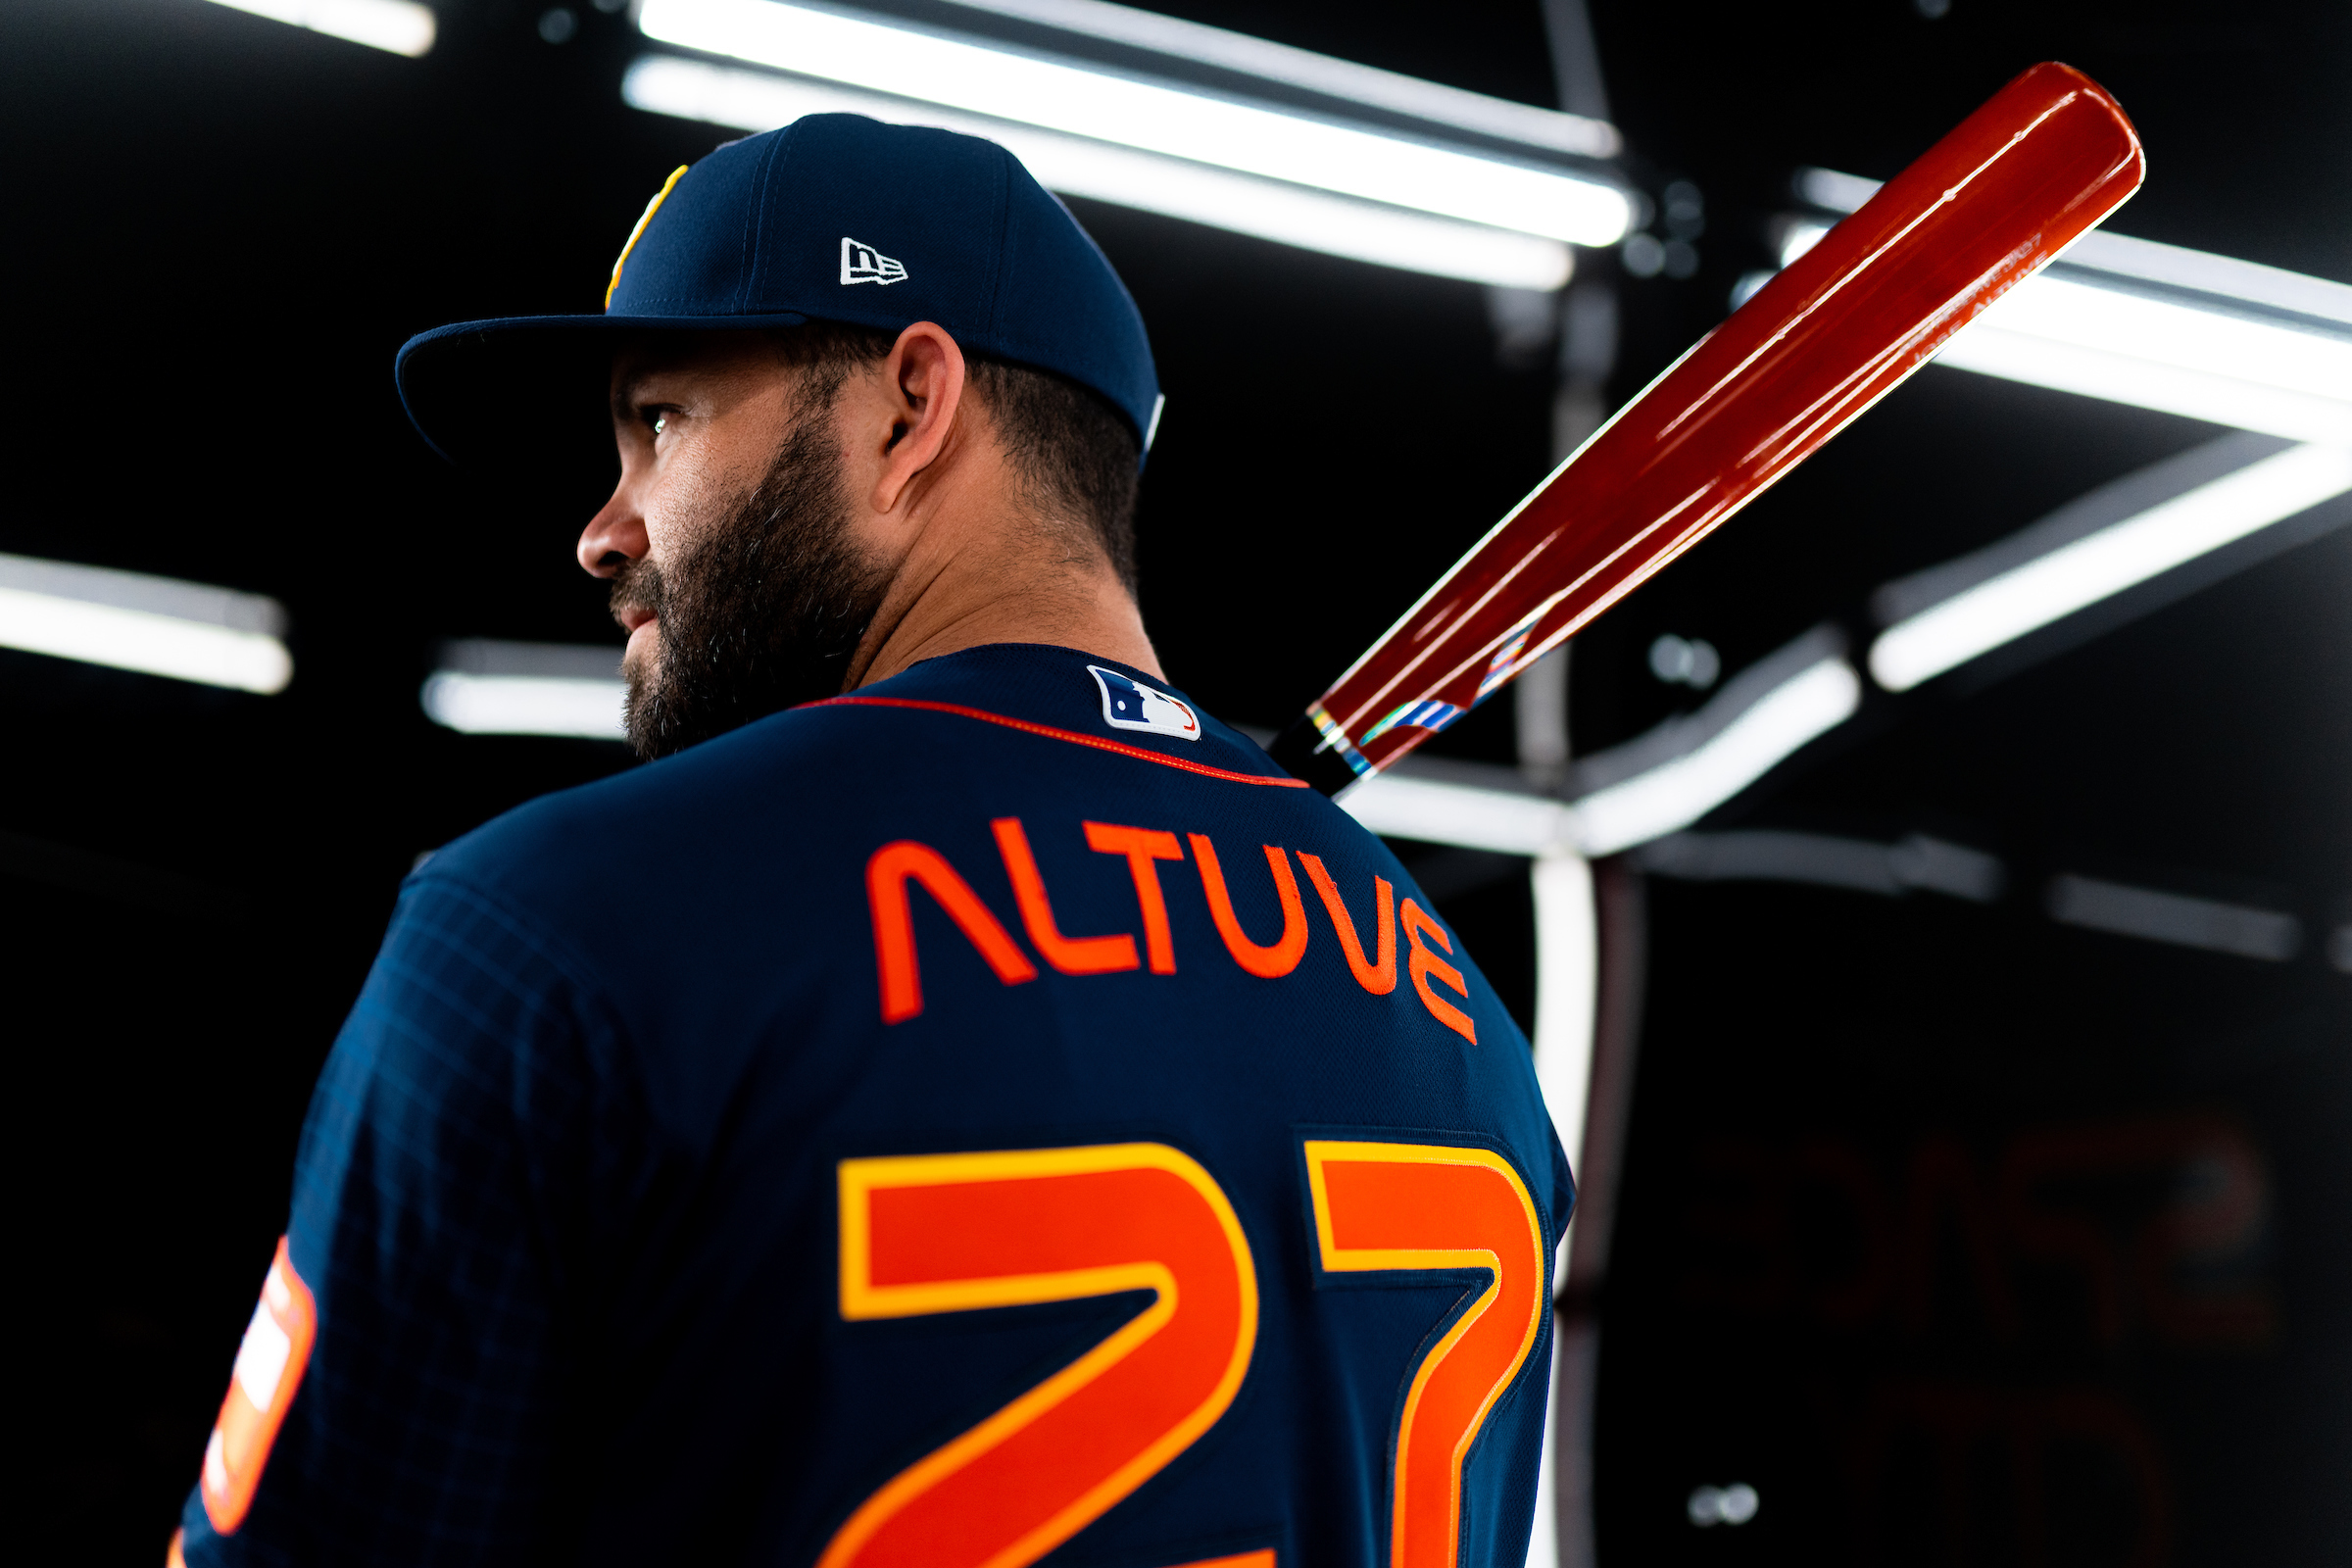 Every MLB City Connect jersey, ranked with a tierlist after new